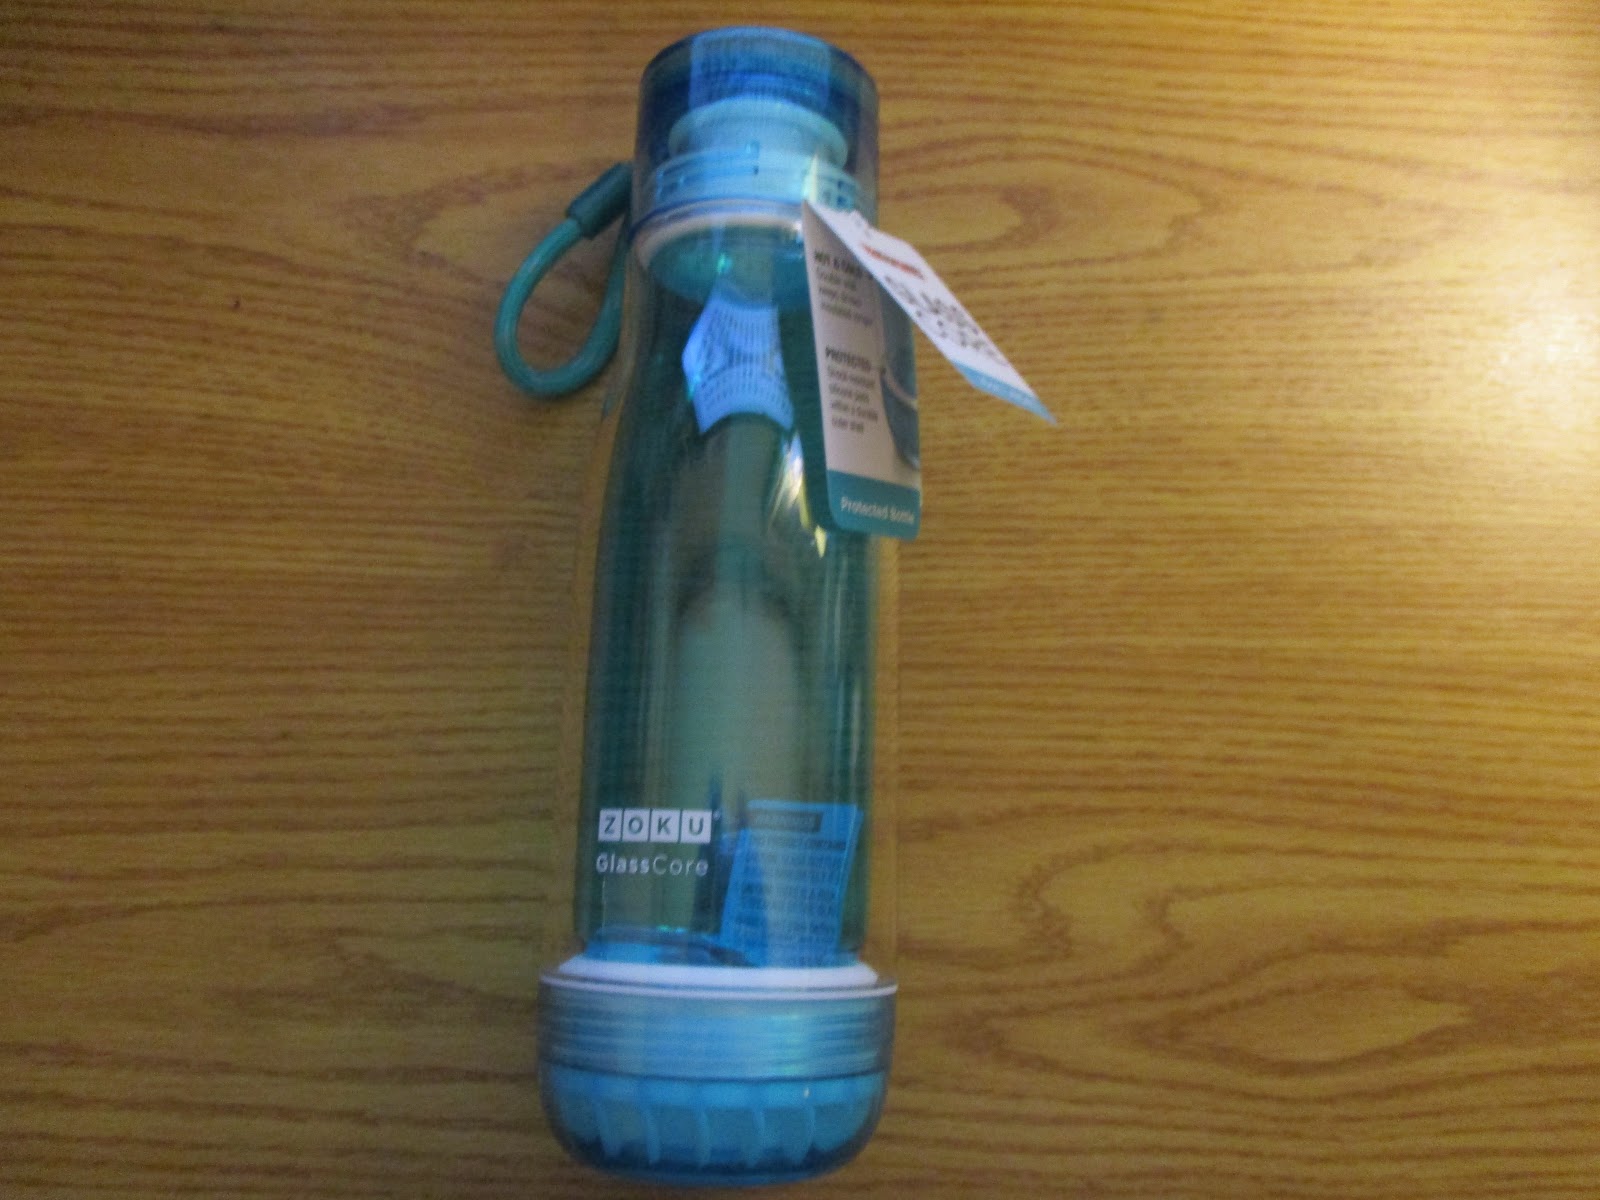 Missys Product Reviews : Zoku 16oz. Glass Core Bottle Holiday Gift